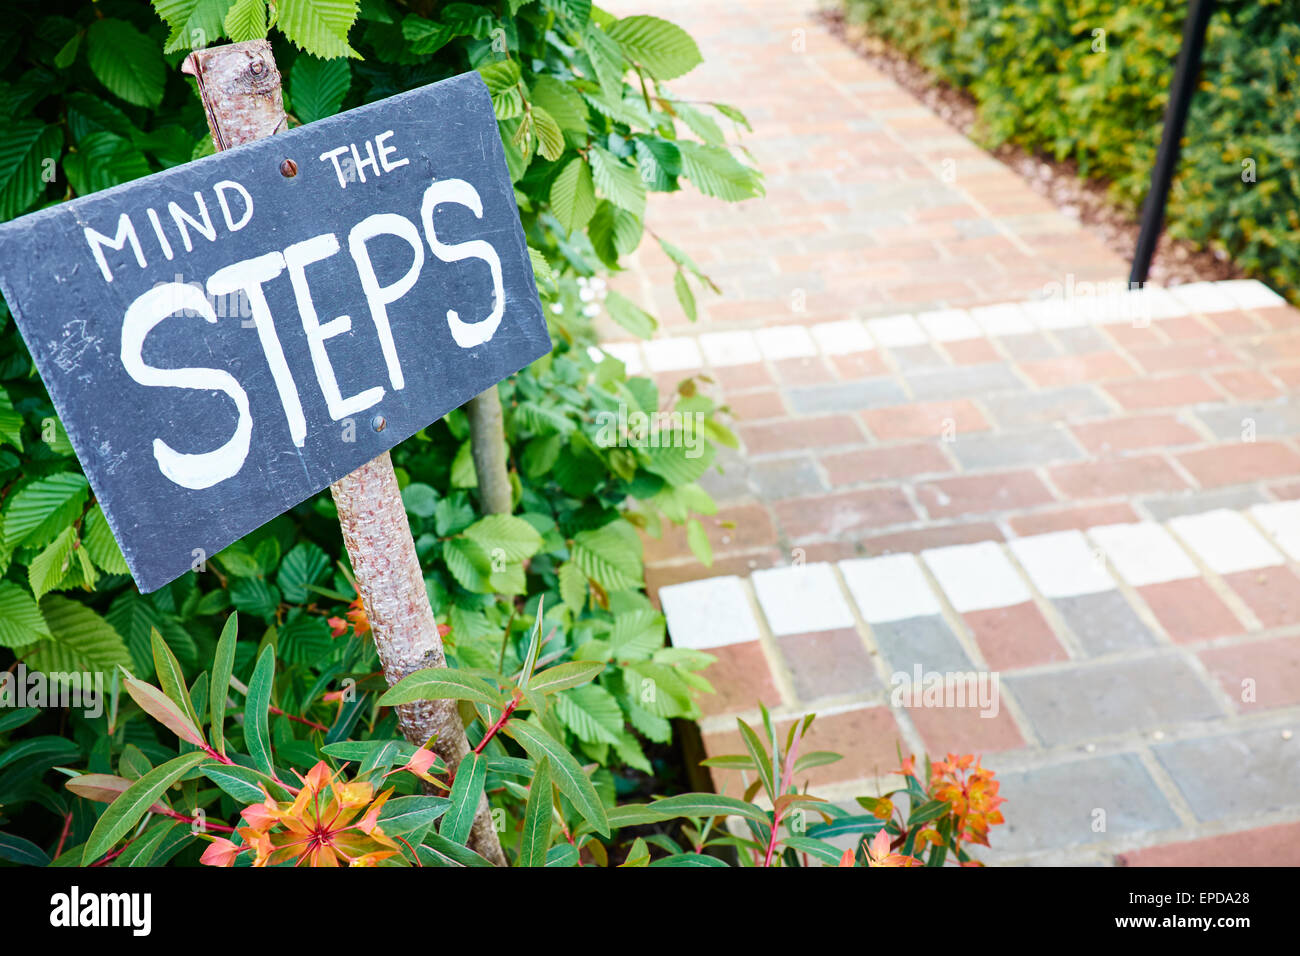 Mind The Steps Sign With Steps In The Background Jordans Mill Holme Mills Langford Road Broom Near Biggleswade Bedfordshire UK Stock Photo